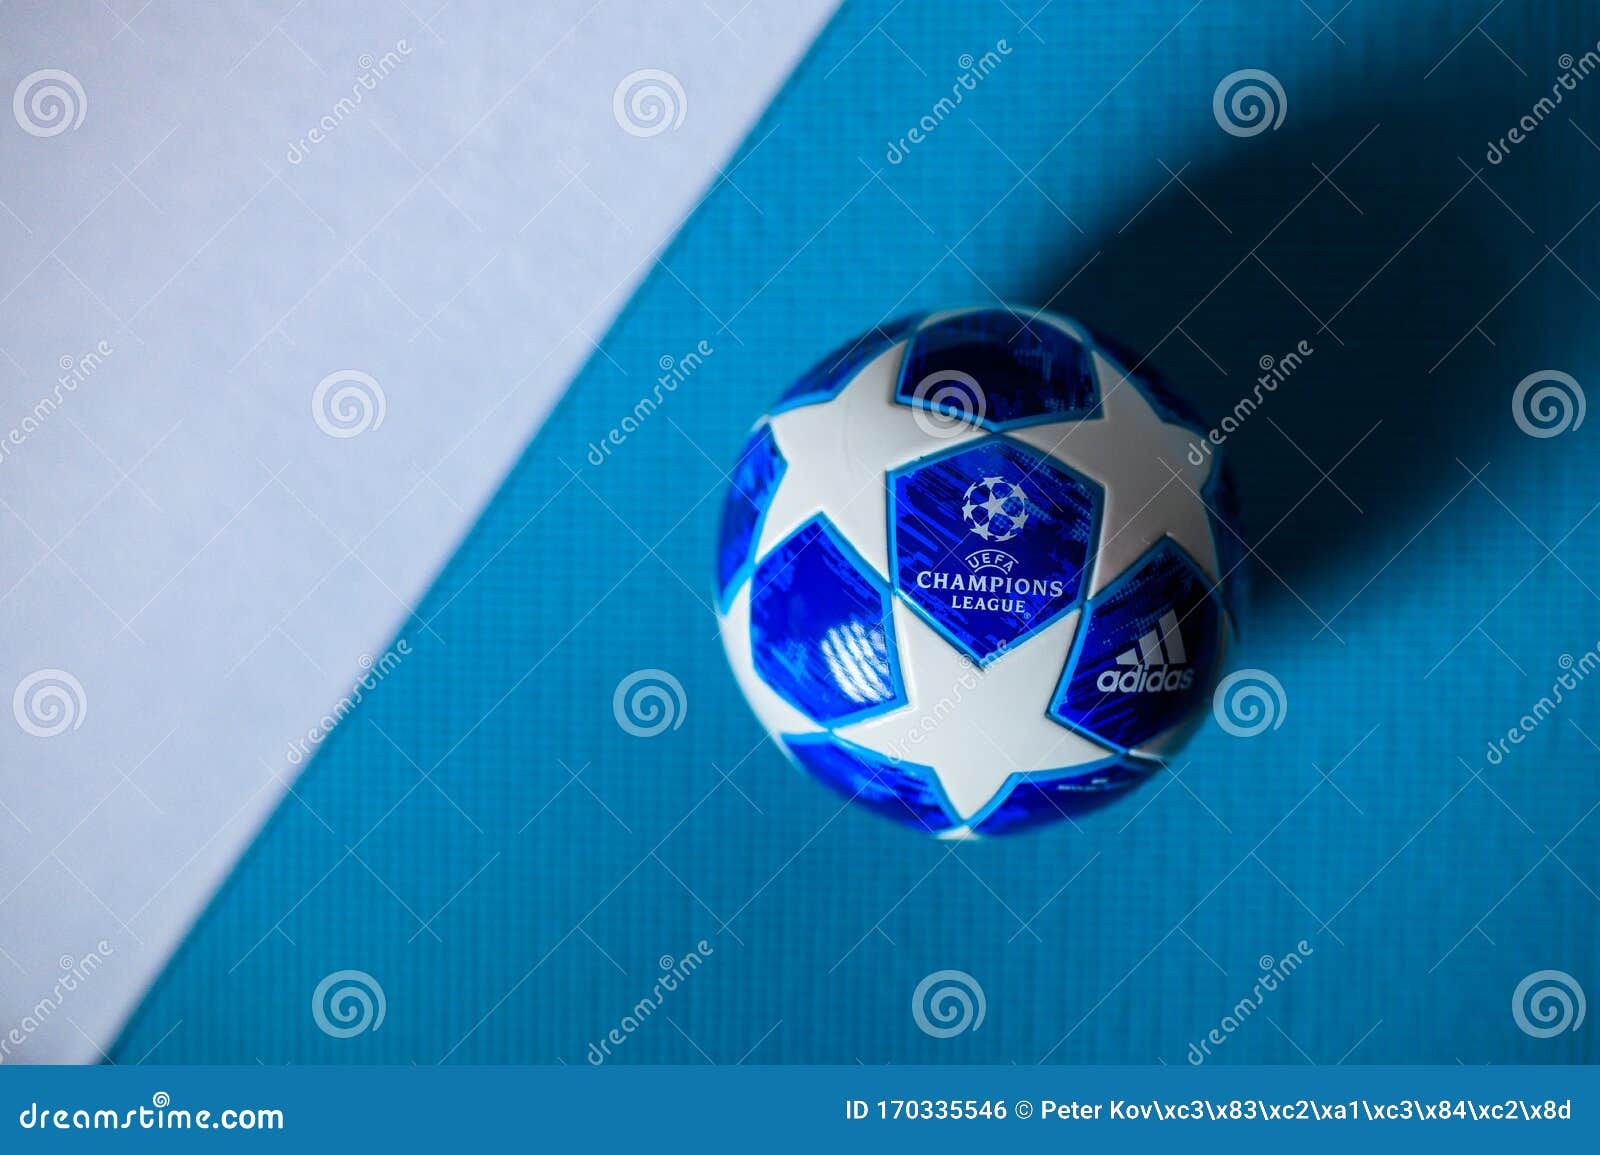 Football Champions League Ball, Blue Background, White Edit Space Editorial  Photo - Image of broadcast, january: 170335546